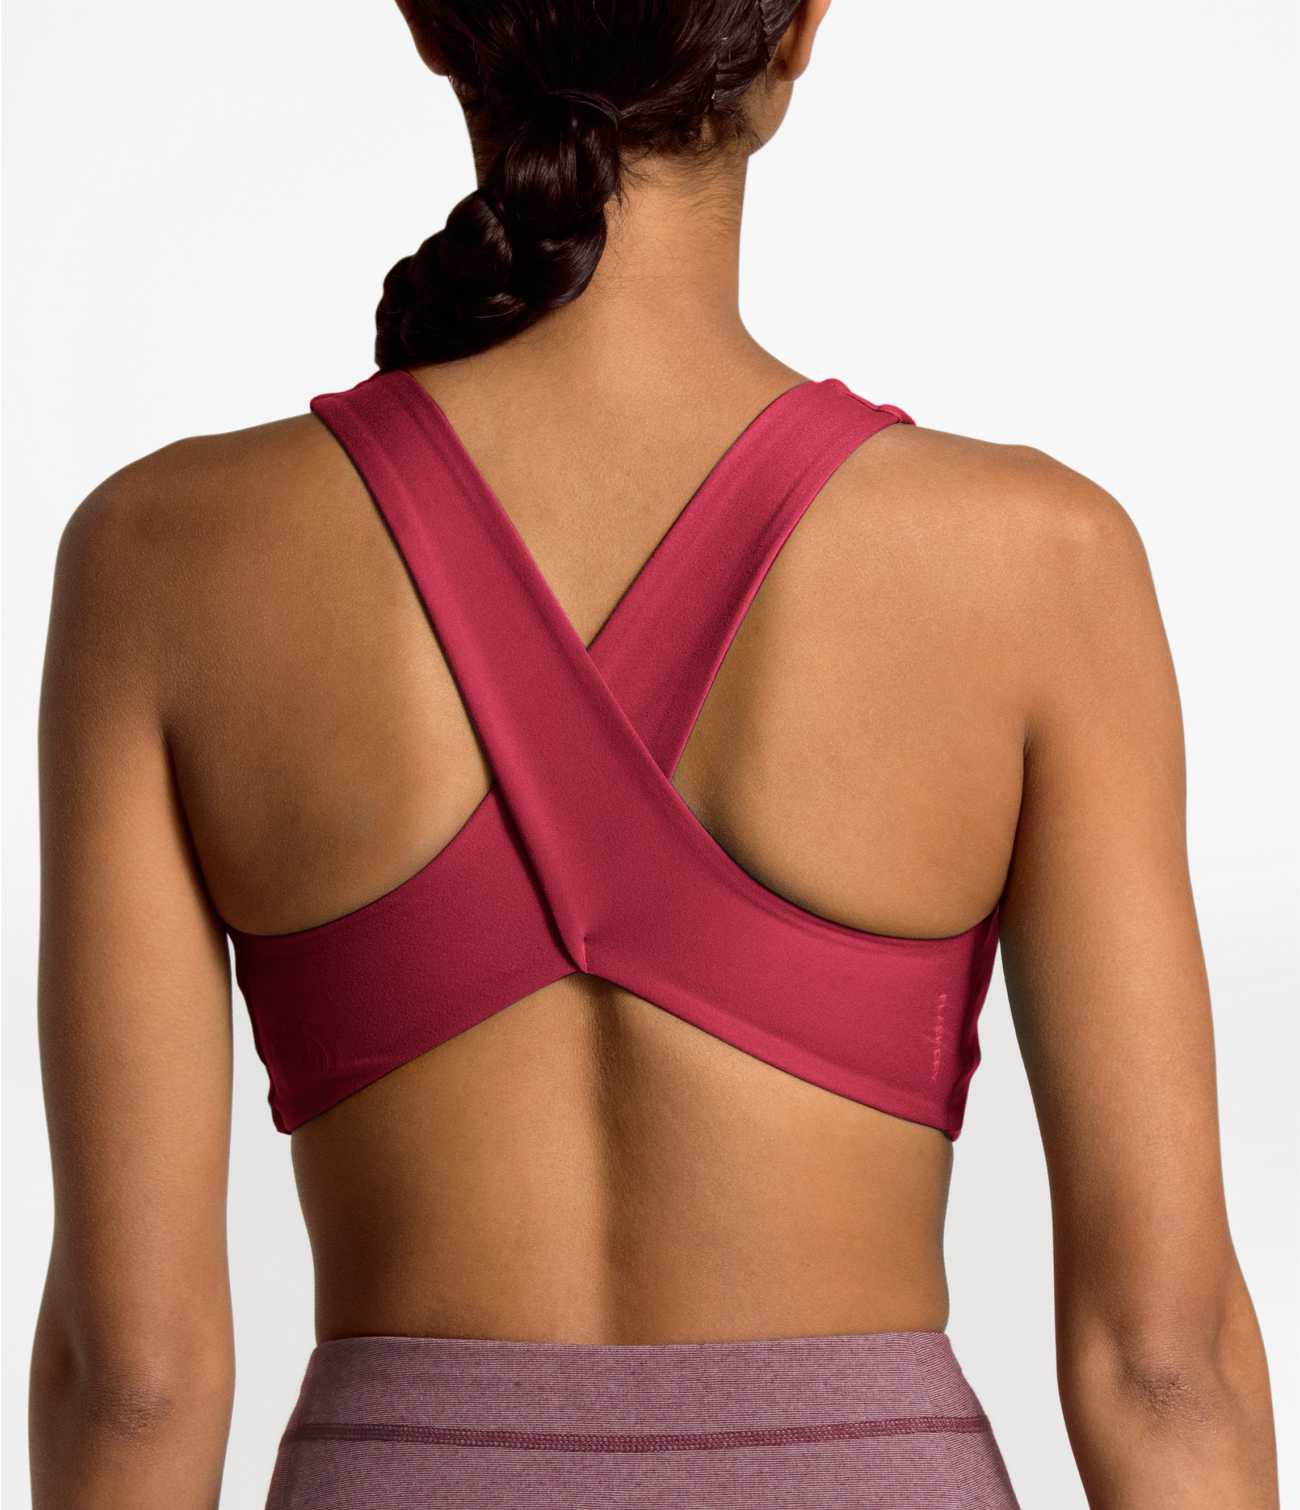 The North Face Renewed - WOMEN'S BEYOND THE WALL FREE MOTION BRA